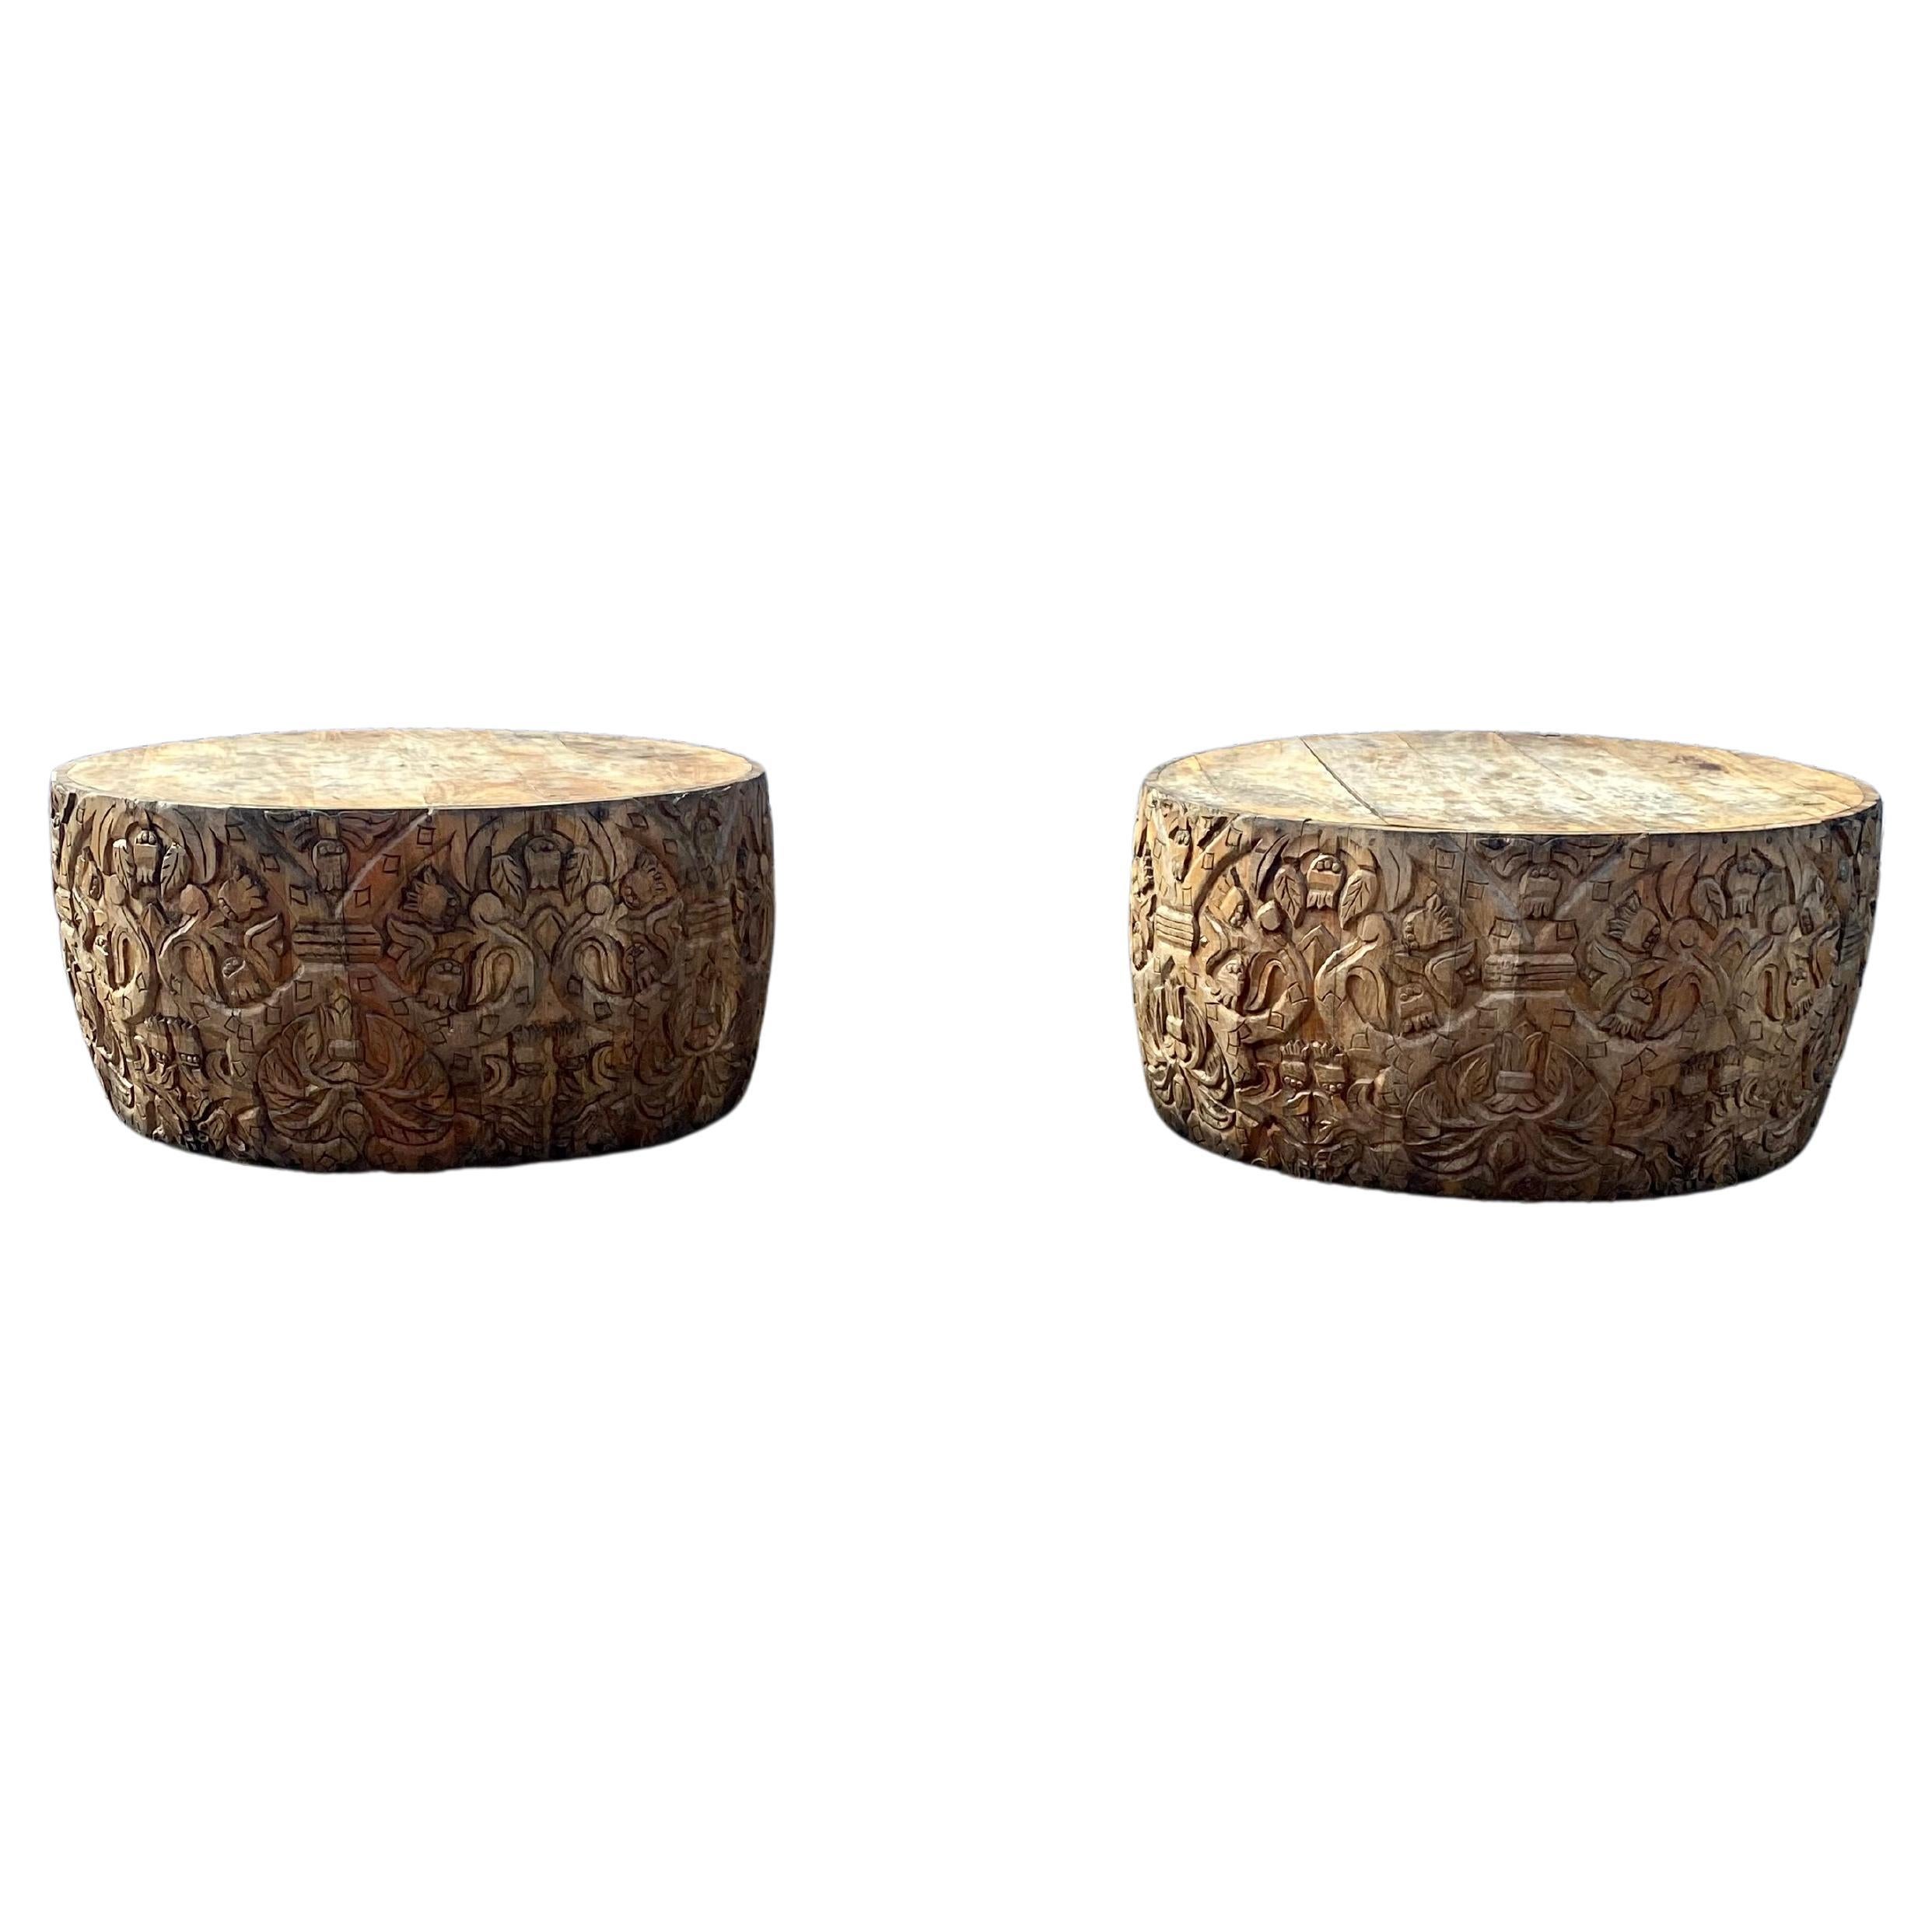 1940s Heavily Carved Teak Gilt Wood Round Drum Coffee Tables, Set of 2 For Sale